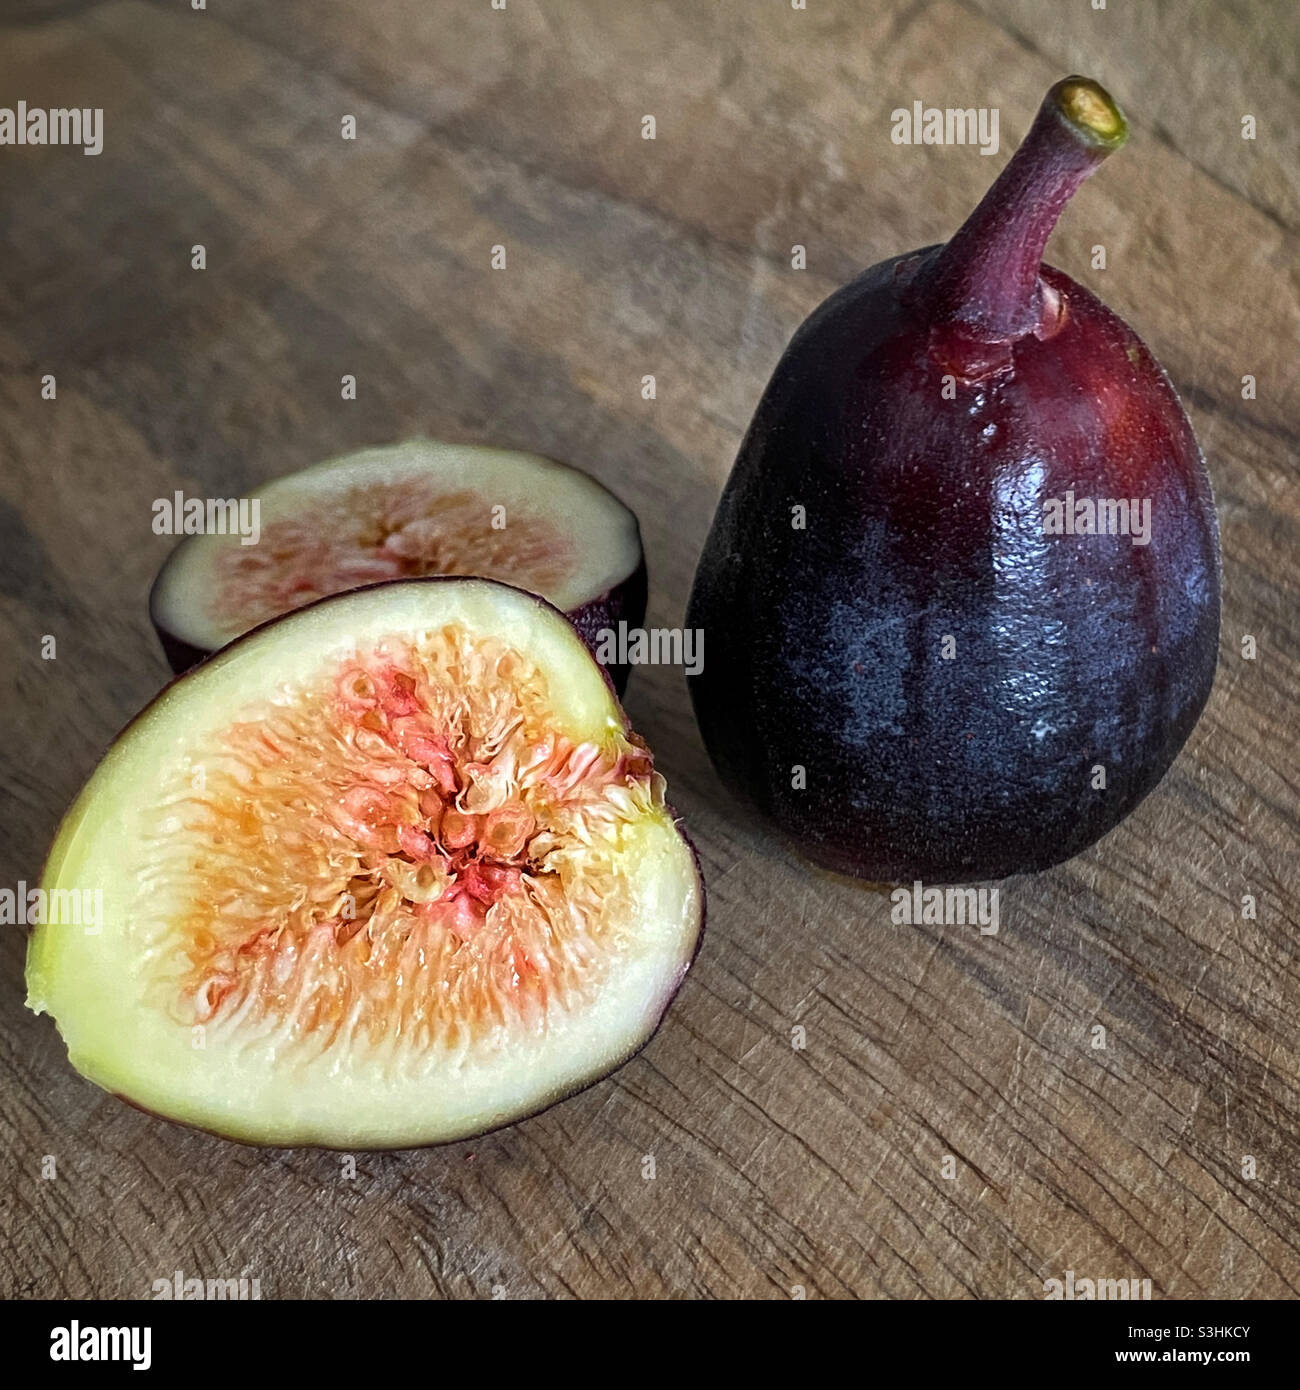 Figs on a wooden cutting board Stock Photo